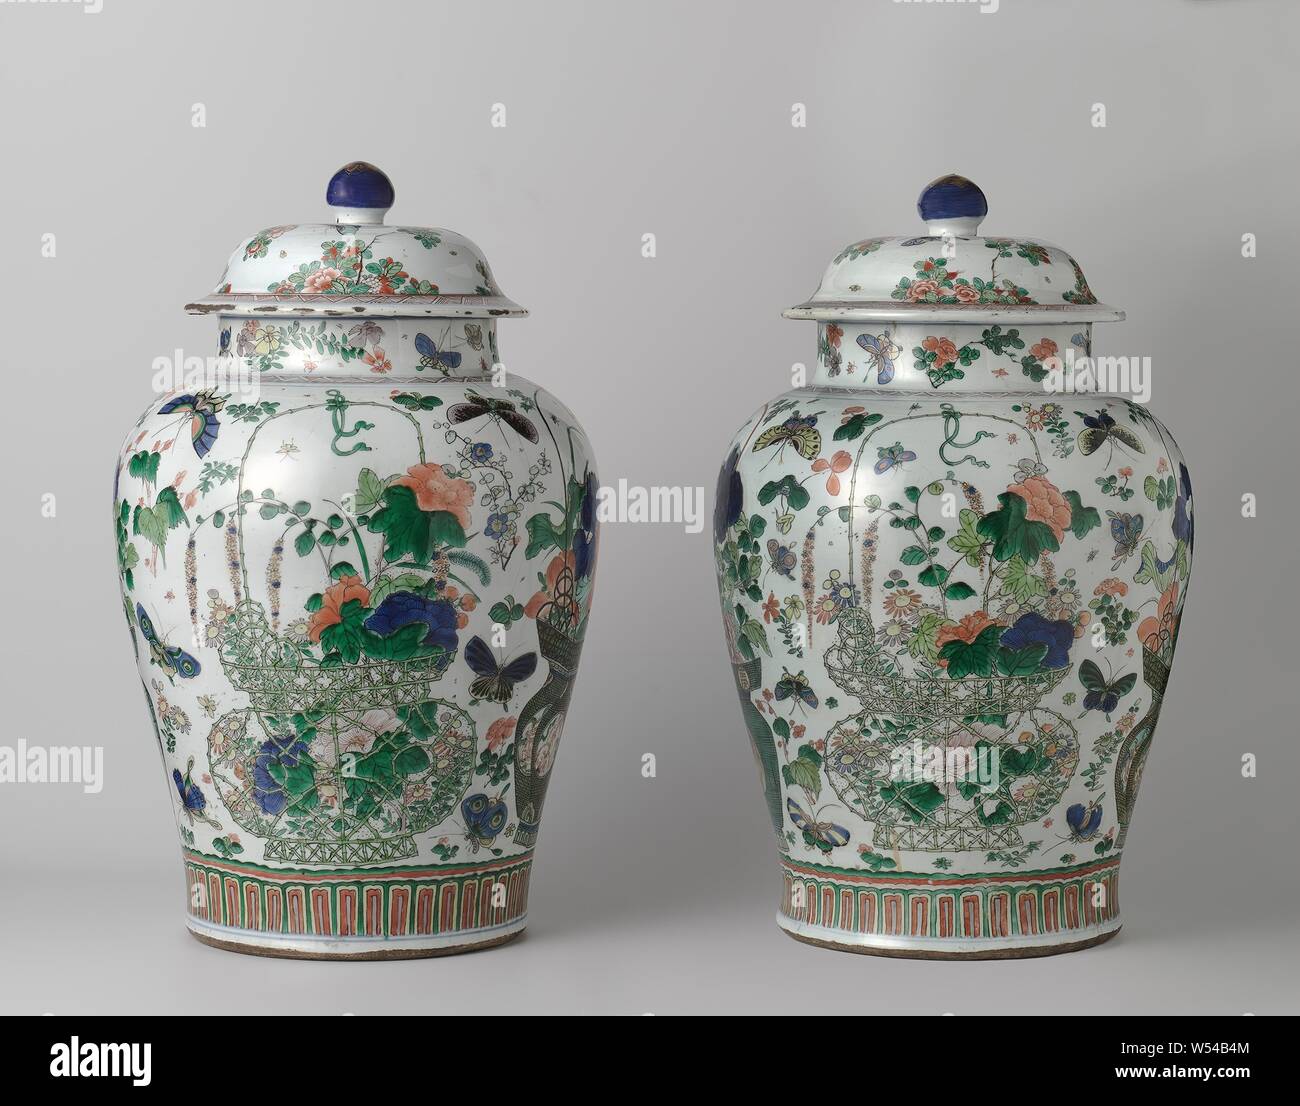 Baluster covered jar with flower baskets, flower sprays and insects, Baluster-shaped porcelain covered pot, painted on the glaze in blue, red, green, yellow, eggplant, black and gold. On the belly four times a flower basket with aster, peony, prunus, blue rain, lotus, chrysanthemum and iris. One basket with shishi and ruyi motifs and one basket with feng huangs and Chinese characters. Separate flower sprays and insects between the baskets. Above the foot a band with stylized leaf motifs. On the shoulder a strap with hatching. The neck with flower sprays and butterflies. A crack in the rim Stock Photo